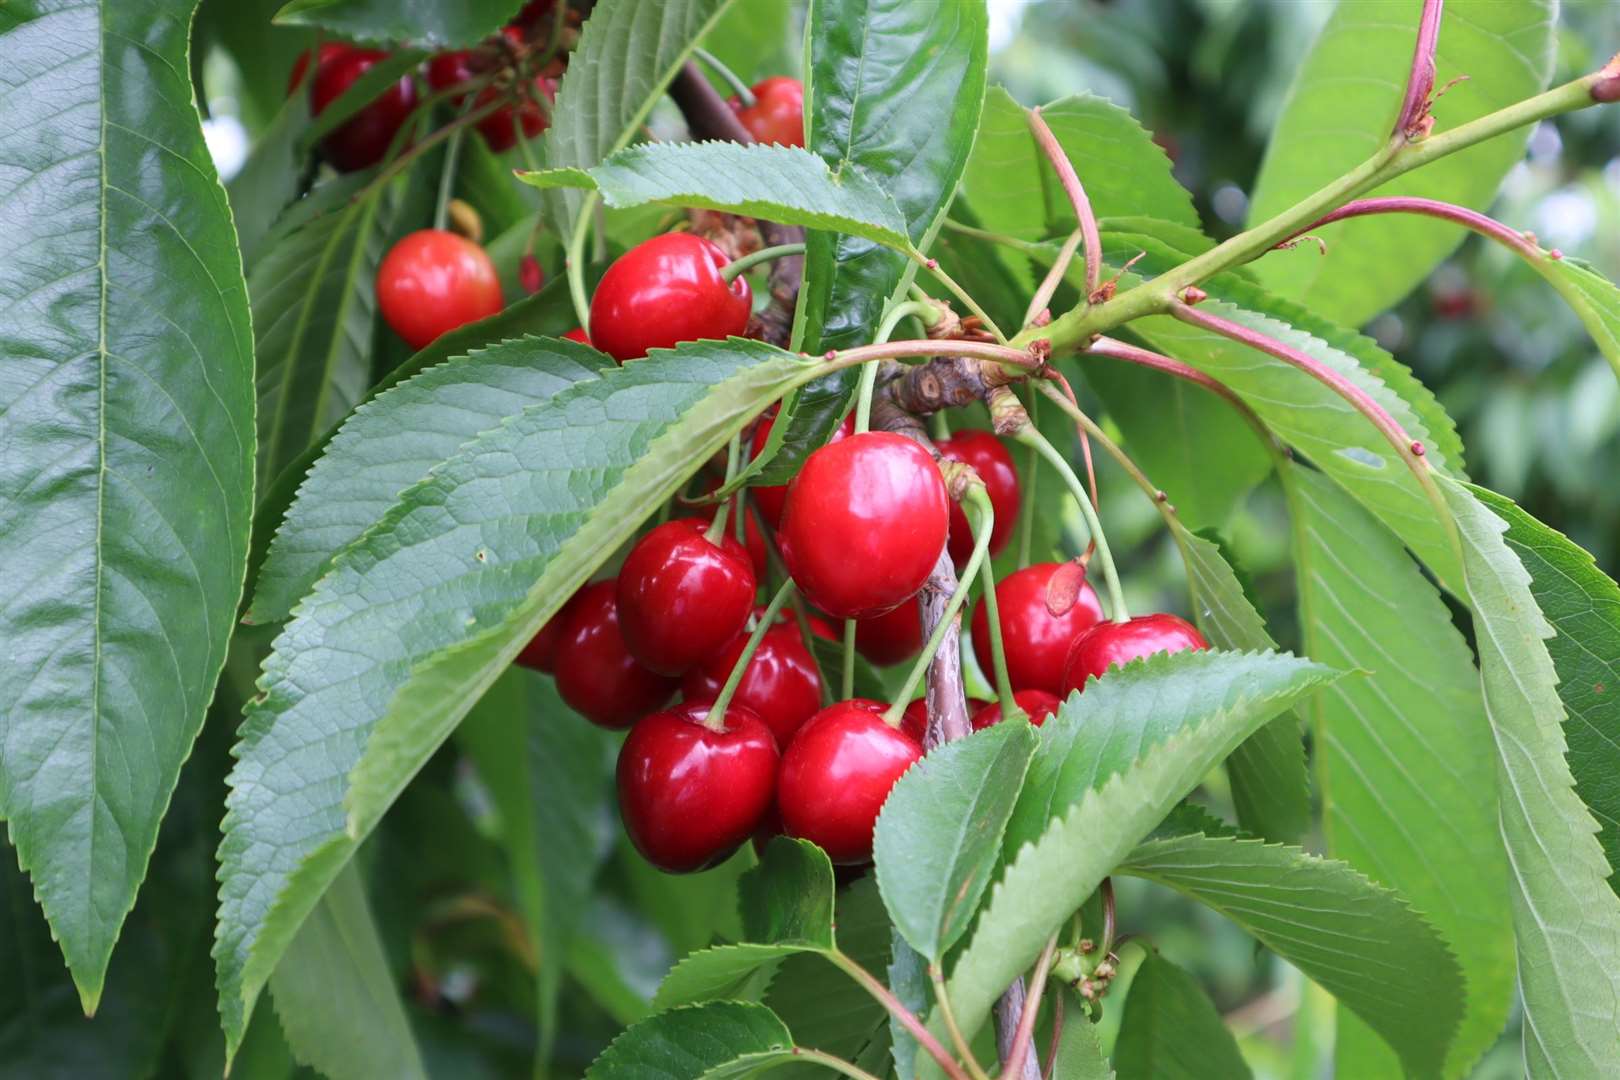 About 208 million cherries are produced by the company each year